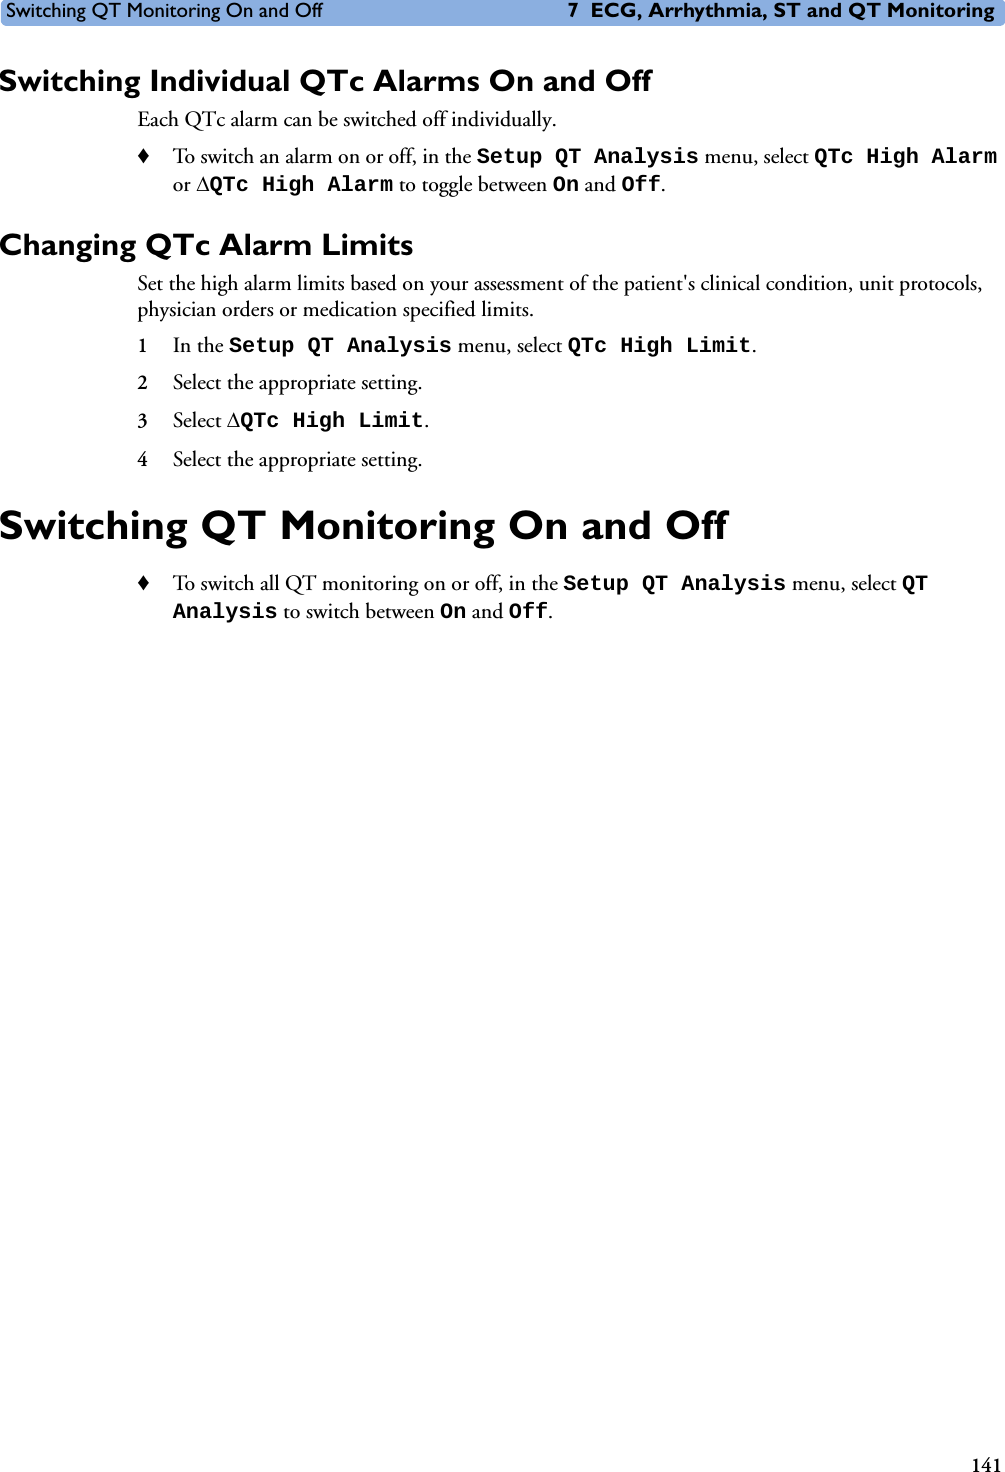 Switching QT Monitoring On and Off 7 ECG, Arrhythmia, ST and QT Monitoring141Switching Individual QTc Alarms On and OffEach QTc alarm can be switched off individually. ♦To switch an alarm on or off, in the Setup QT Analysis menu, select QTc High Alarm or QTc High Alarm to toggle between On and Off.Changing QTc Alarm LimitsSet the high alarm limits based on your assessment of the patient&apos;s clinical condition, unit protocols, physician orders or medication specified limits.1In the Setup QT Analysis menu, select QTc High Limit.2Select the appropriate setting. 3Select QTc High Limit.4Select the appropriate setting.Switching QT Monitoring On and Off♦To switch all QT monitoring on or off, in the Setup QT Analysis menu, select QT Analysis to switch between On and Off.